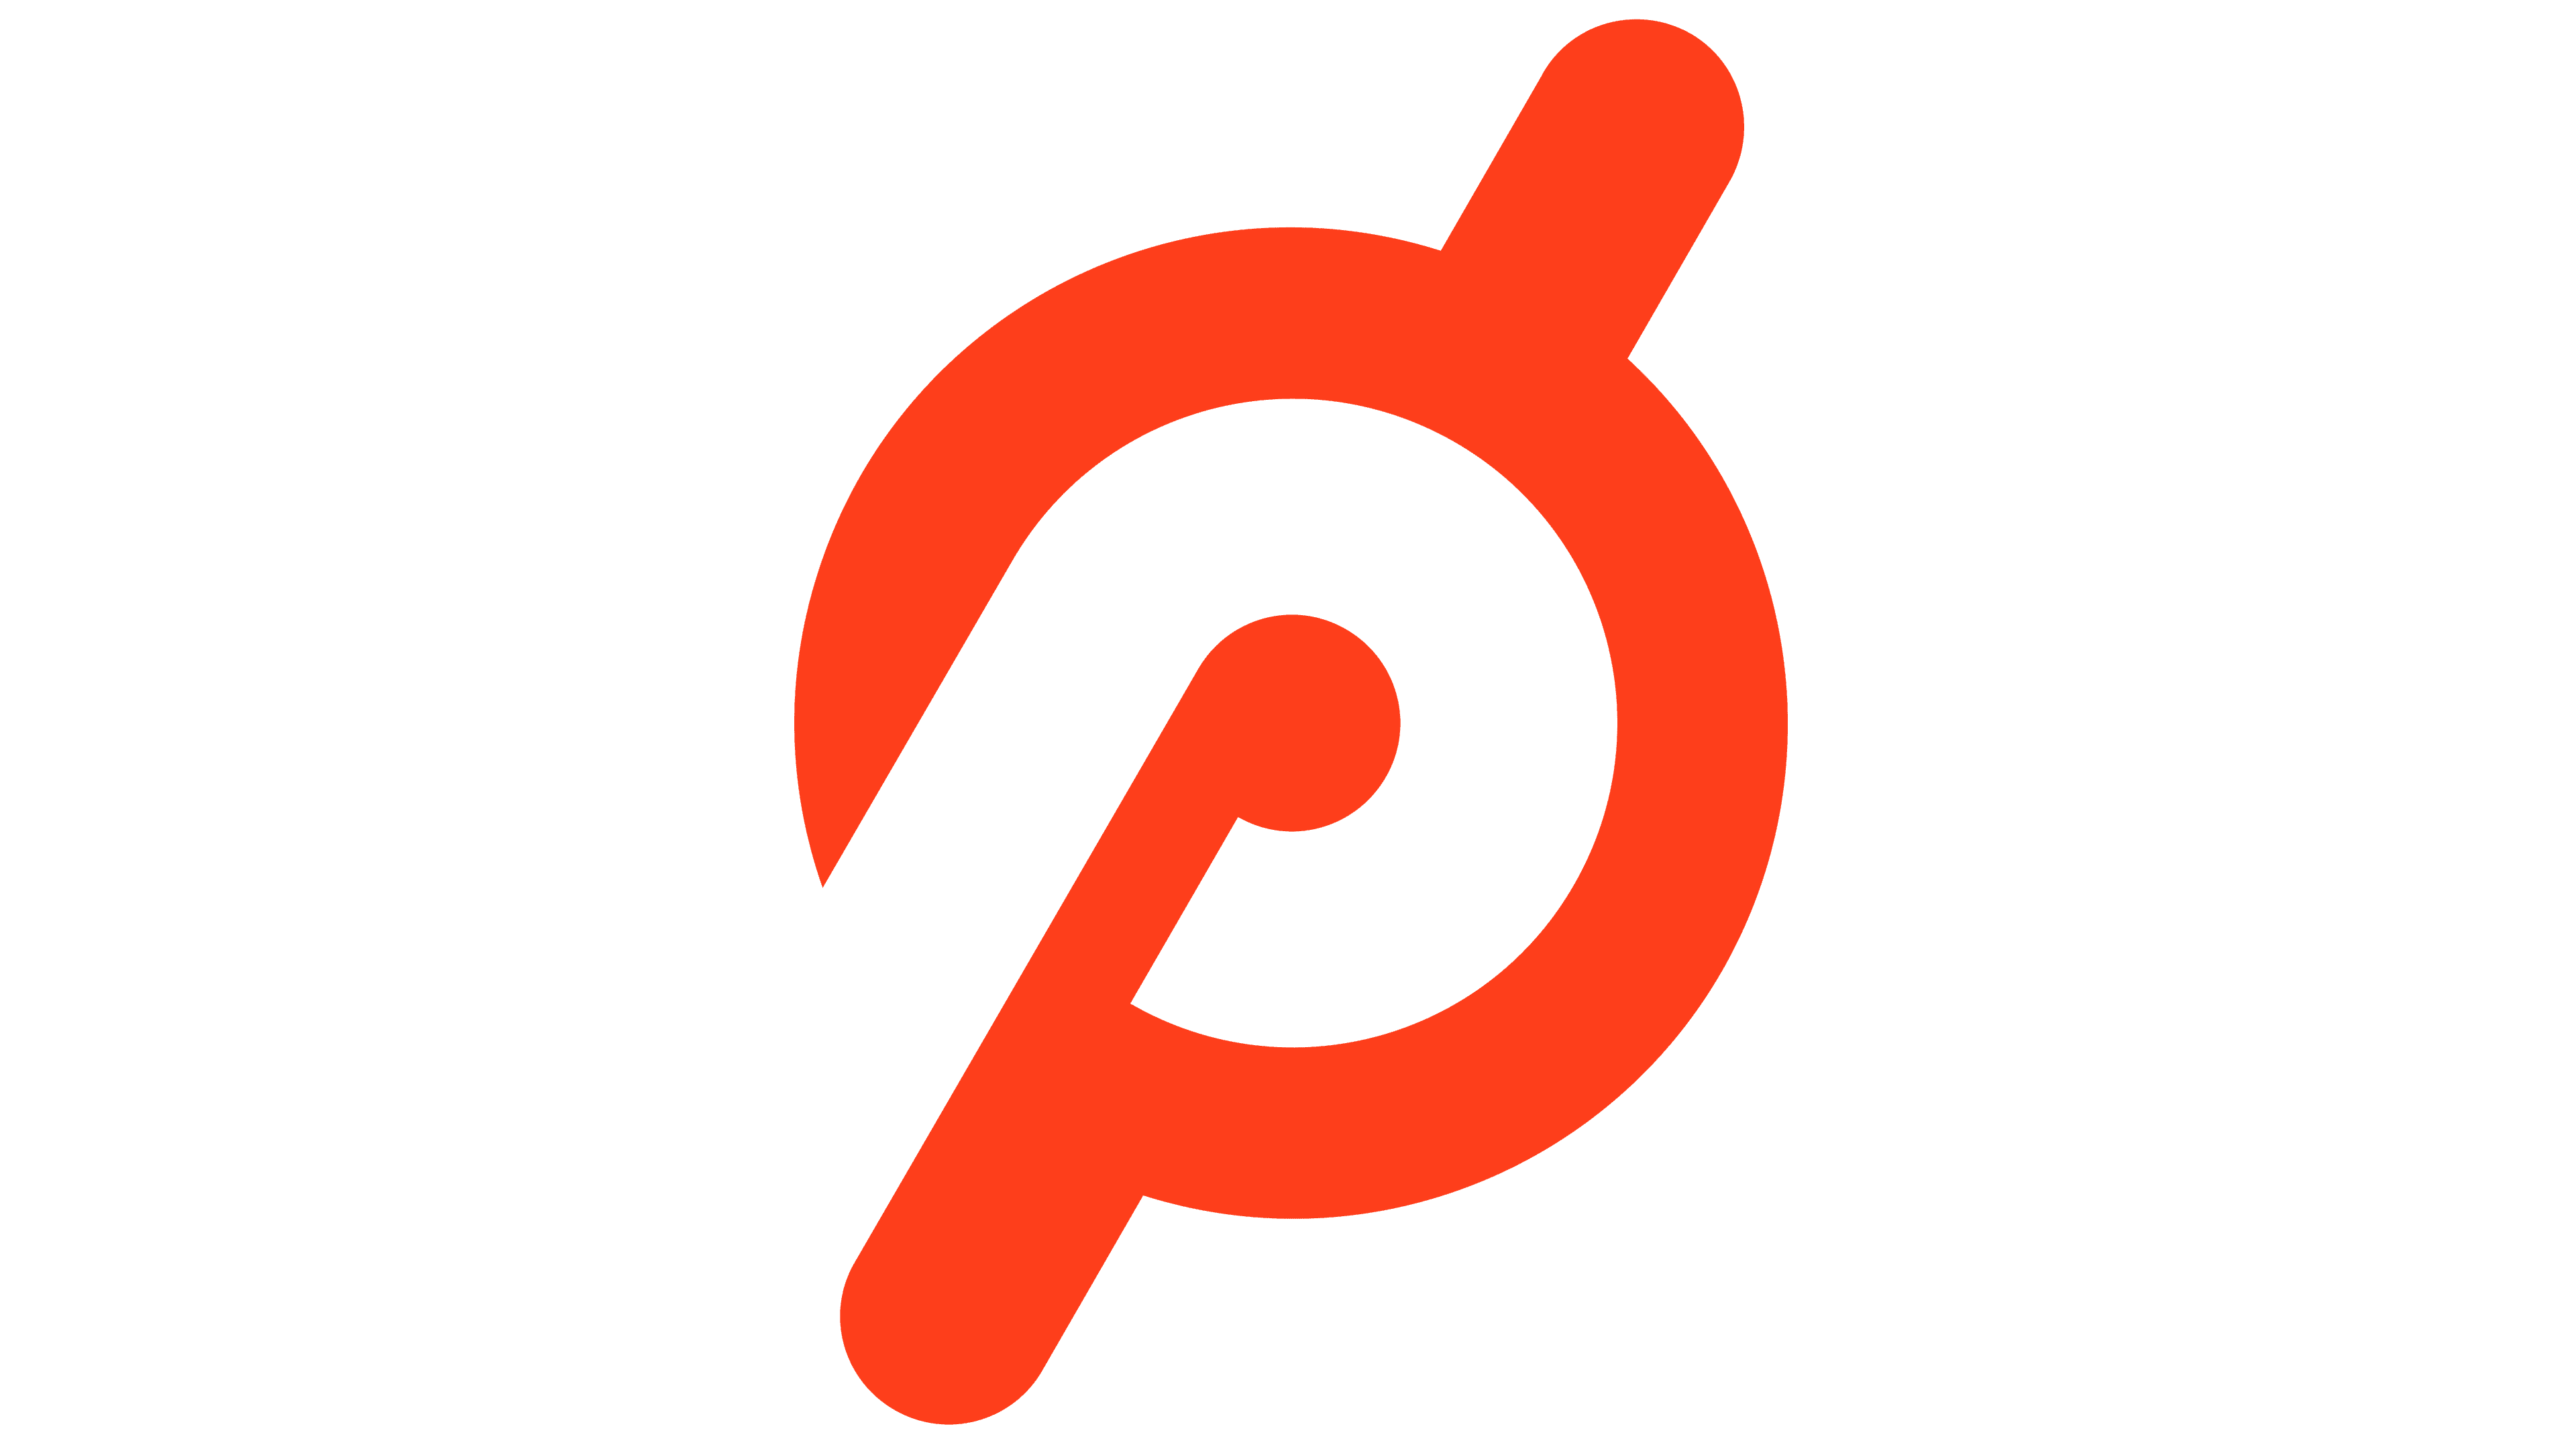 Peloton Logo, symbol, meaning, history, PNG, brand